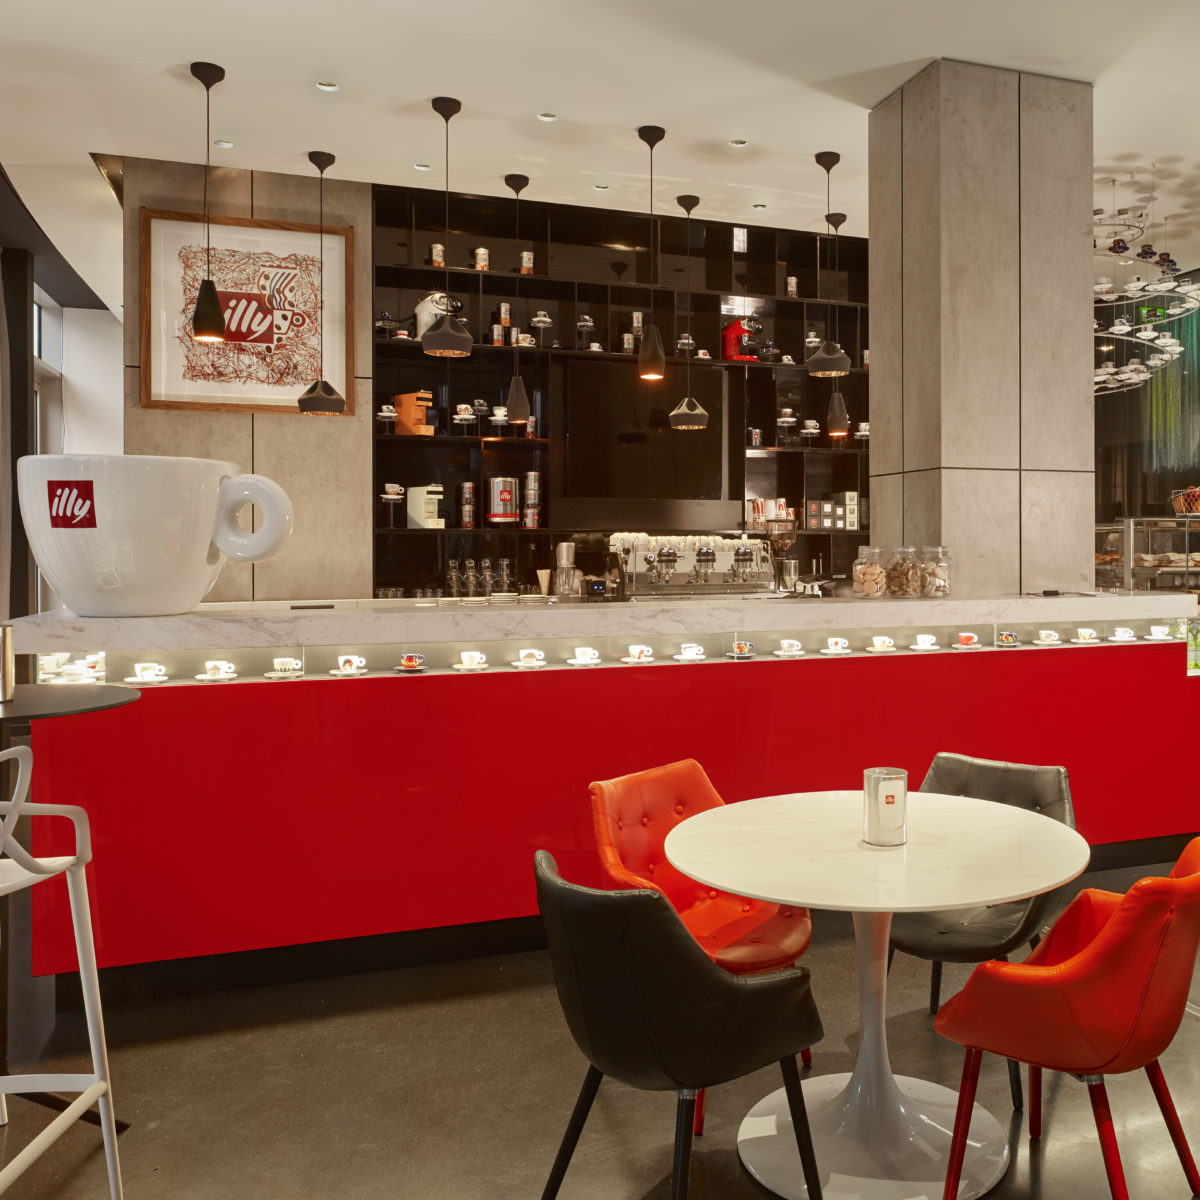 Interior shot of illy cafe with a red bar with tea pots decorating it